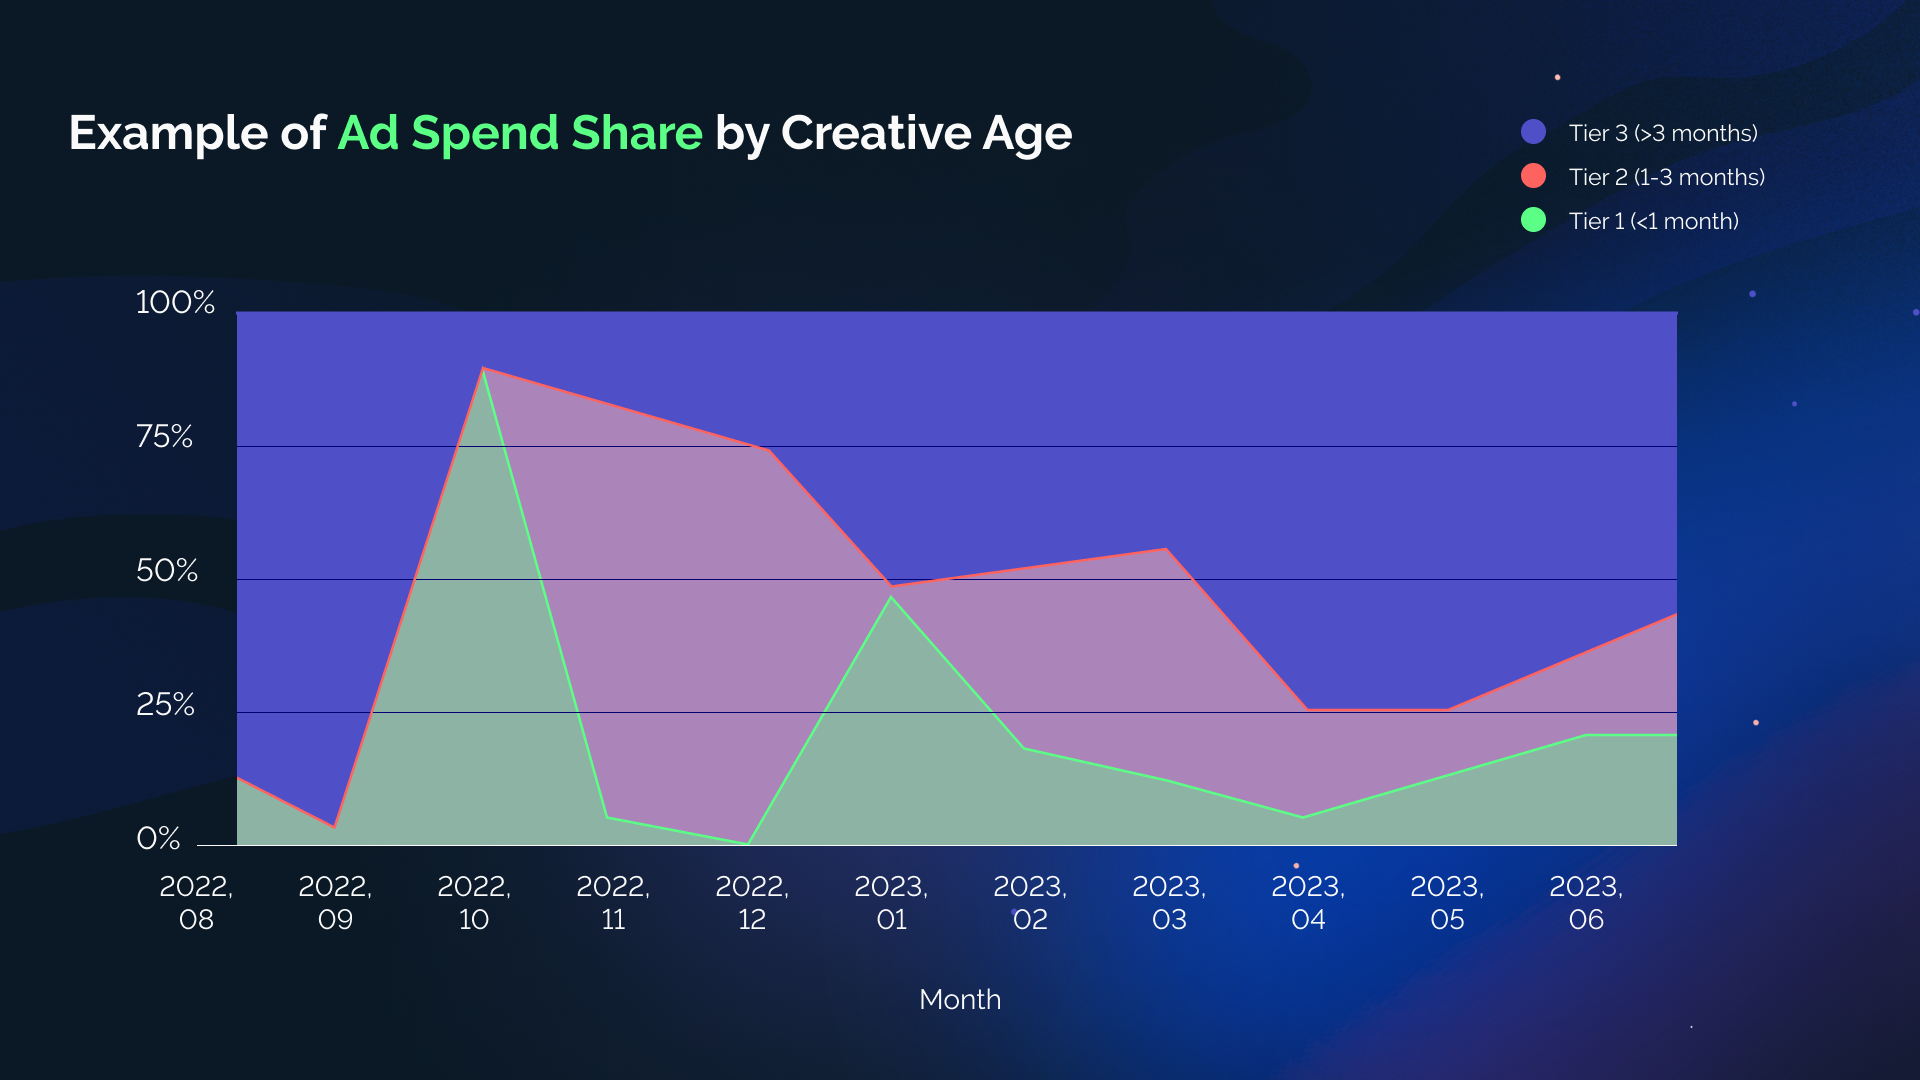 Example of Ad Spend Share by Creative Age